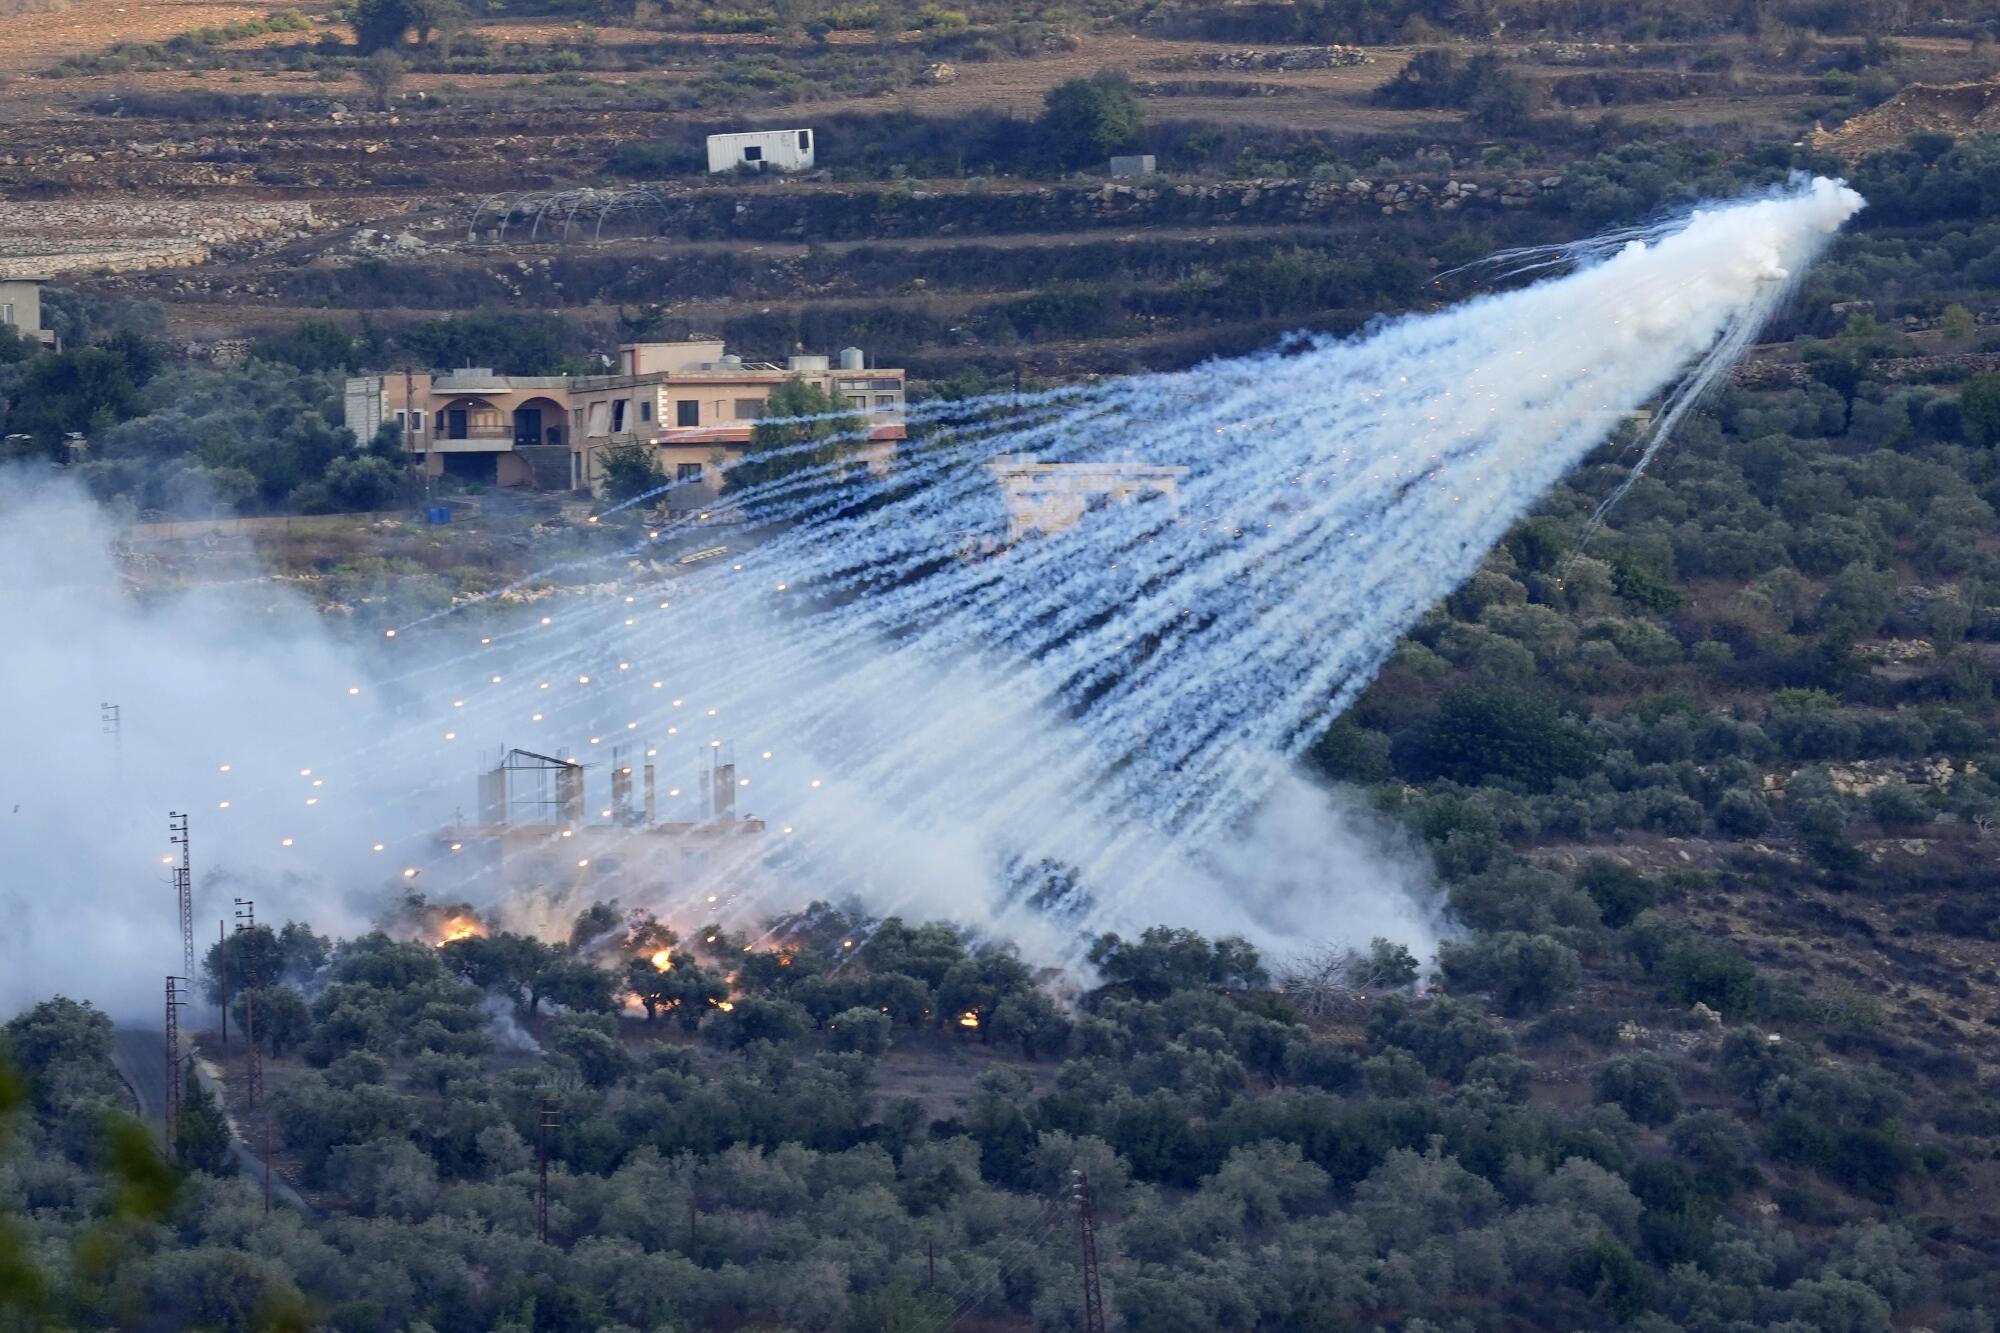 A shell that appears to be white phosphorus from Israeli artillery explodes over homes and farmland.